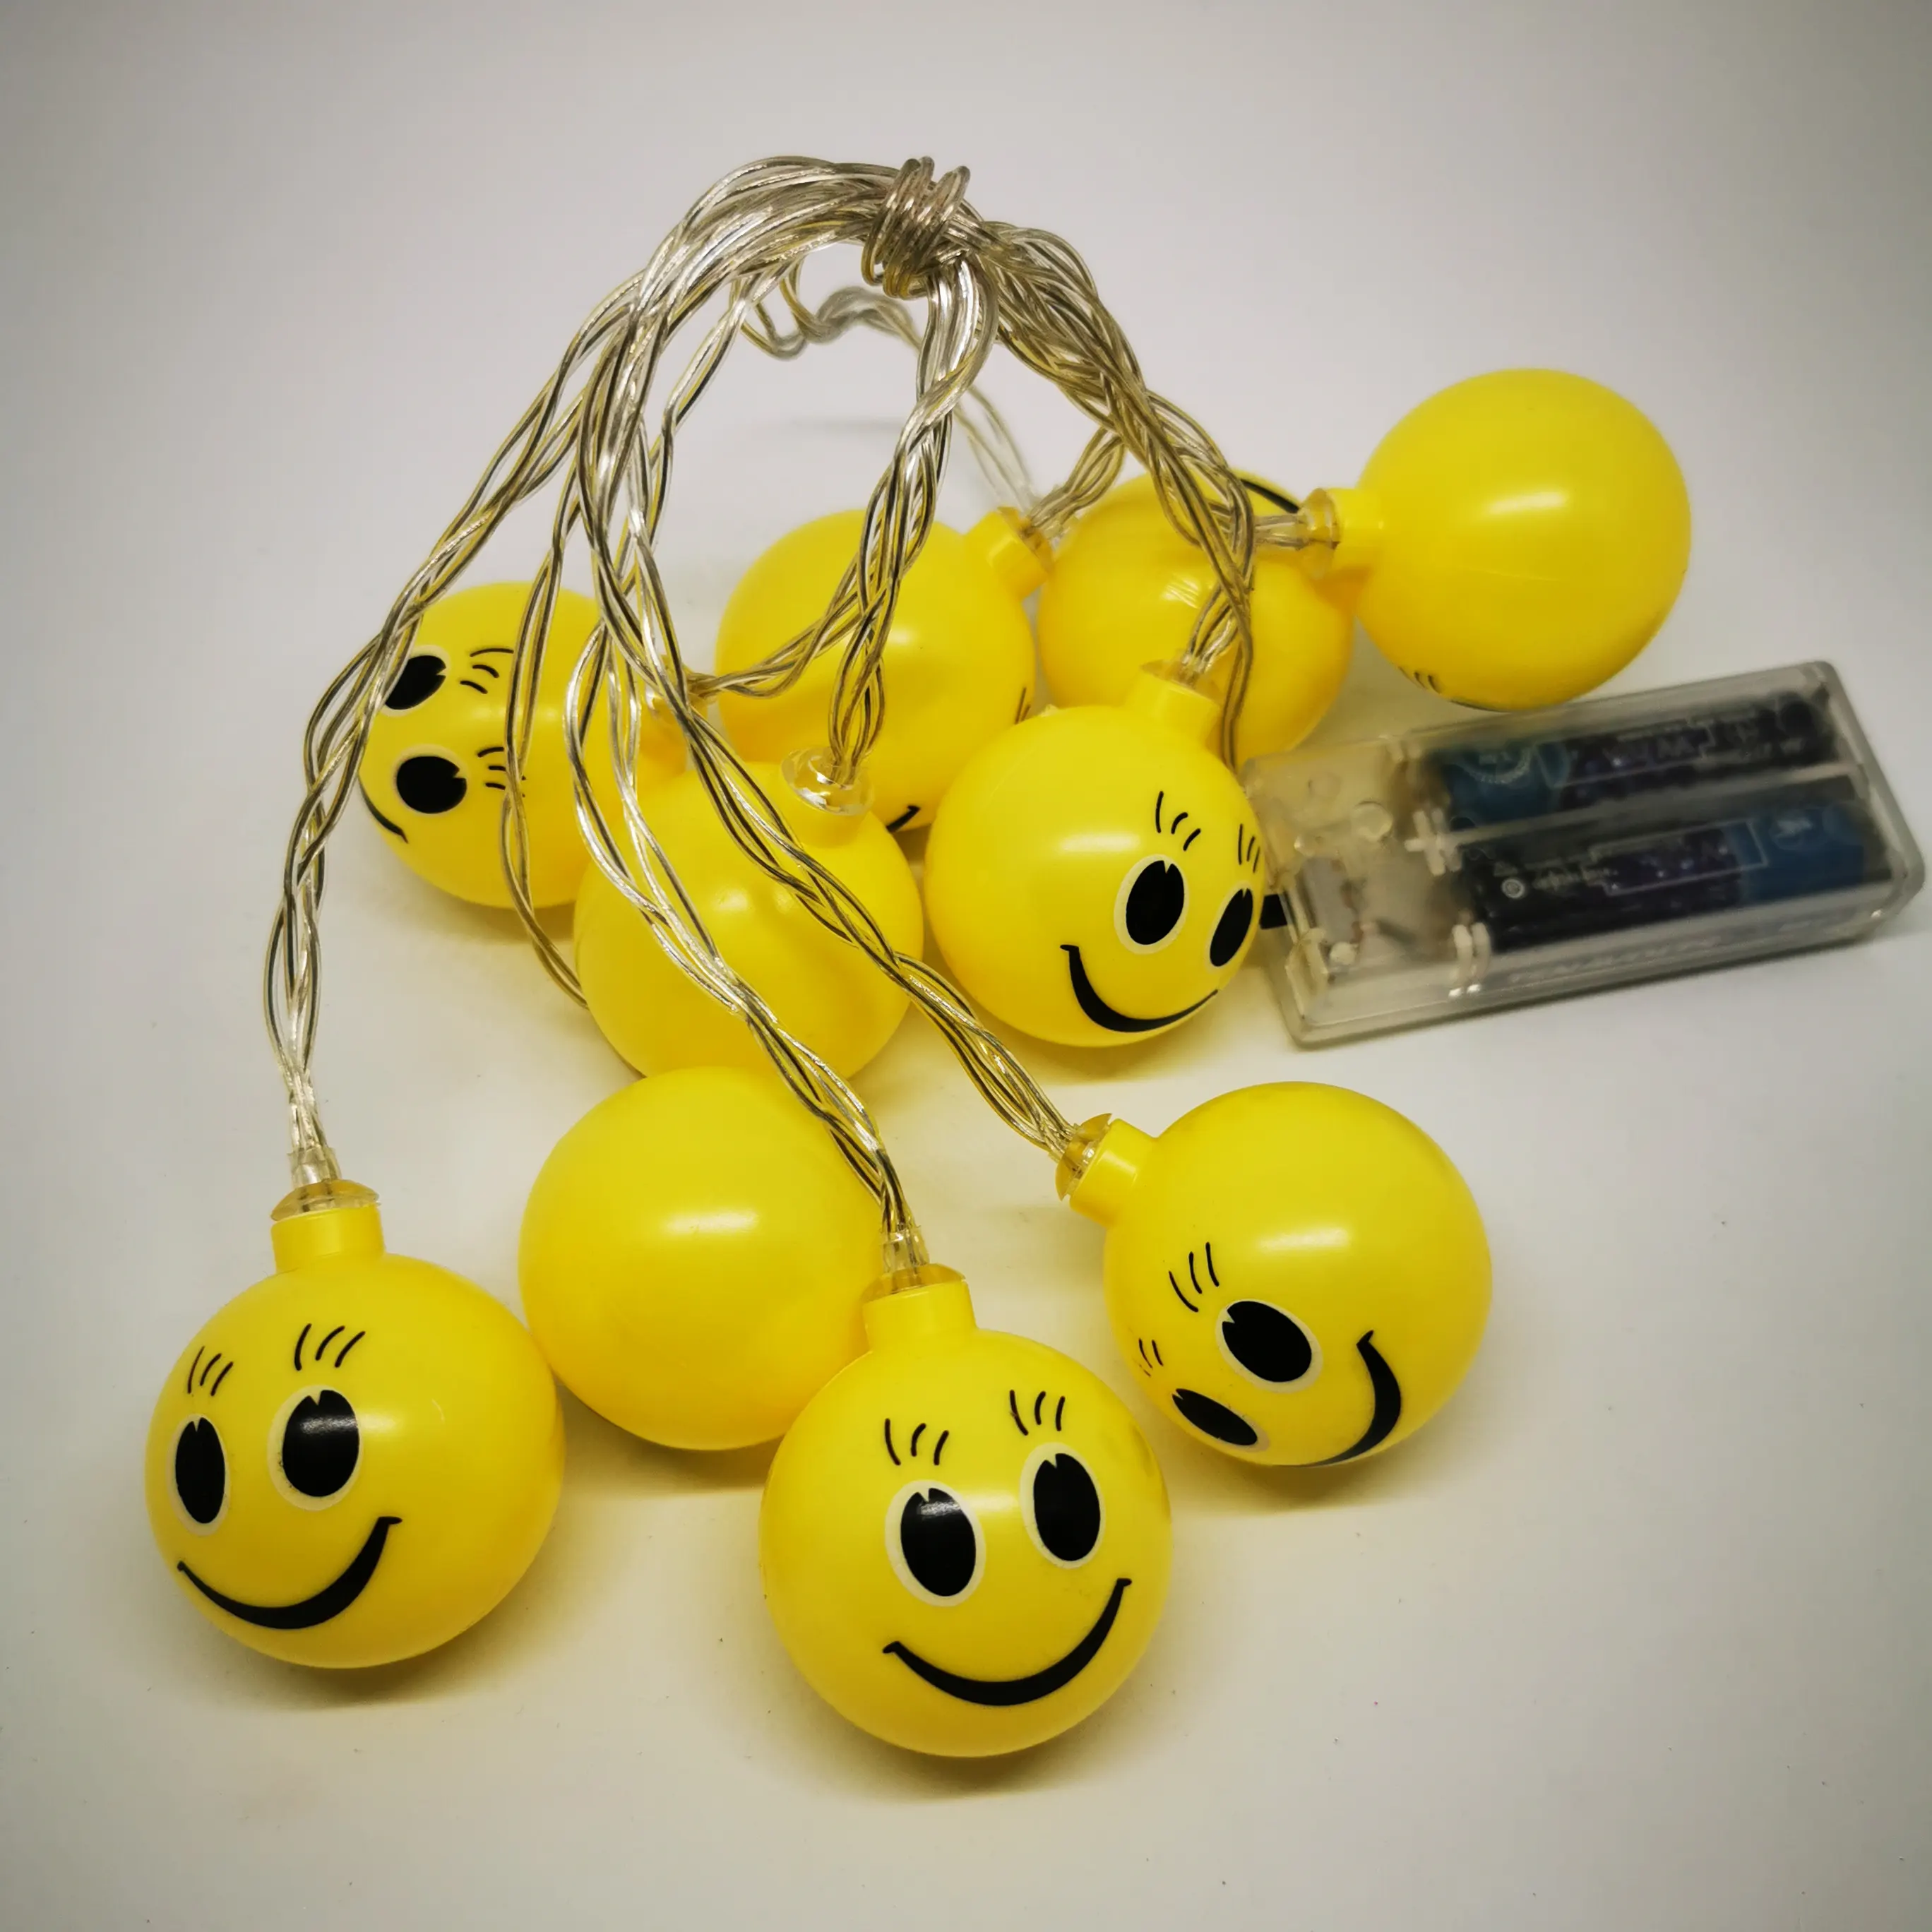 Home decorative battery powered smile face led light string